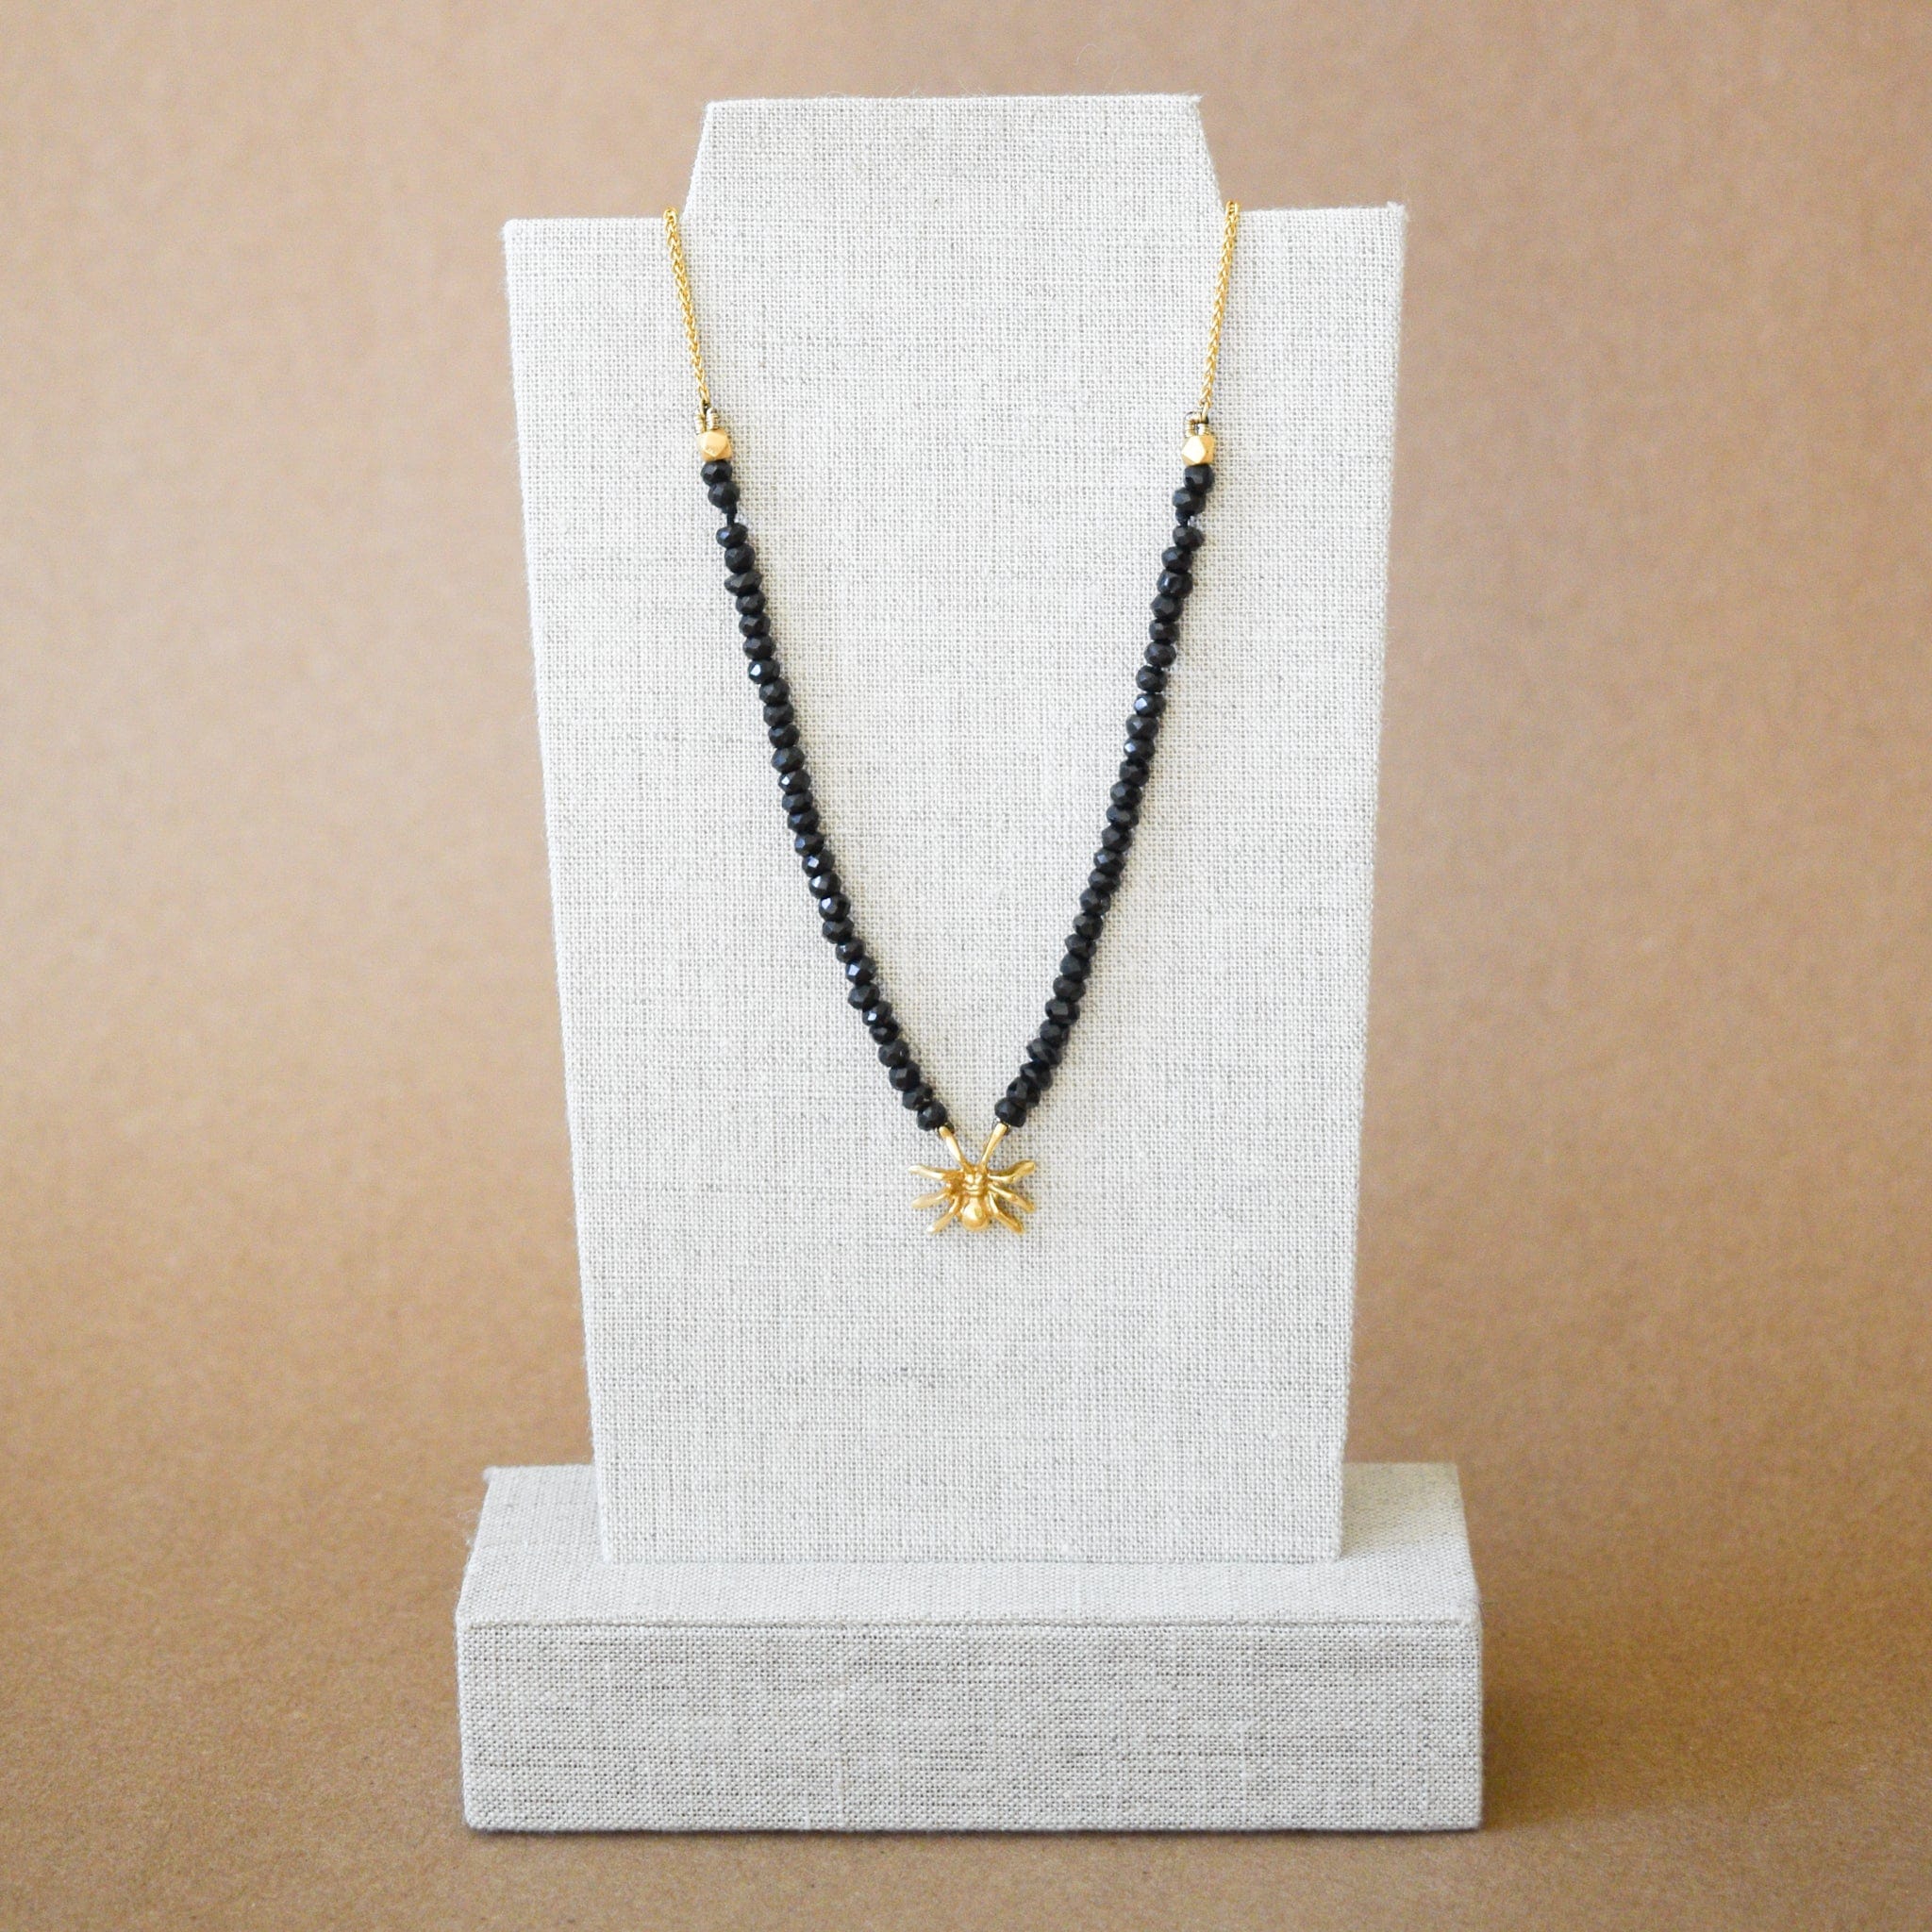 +COOP Jewlery 14K Gold Spider on Black Beaded Chain